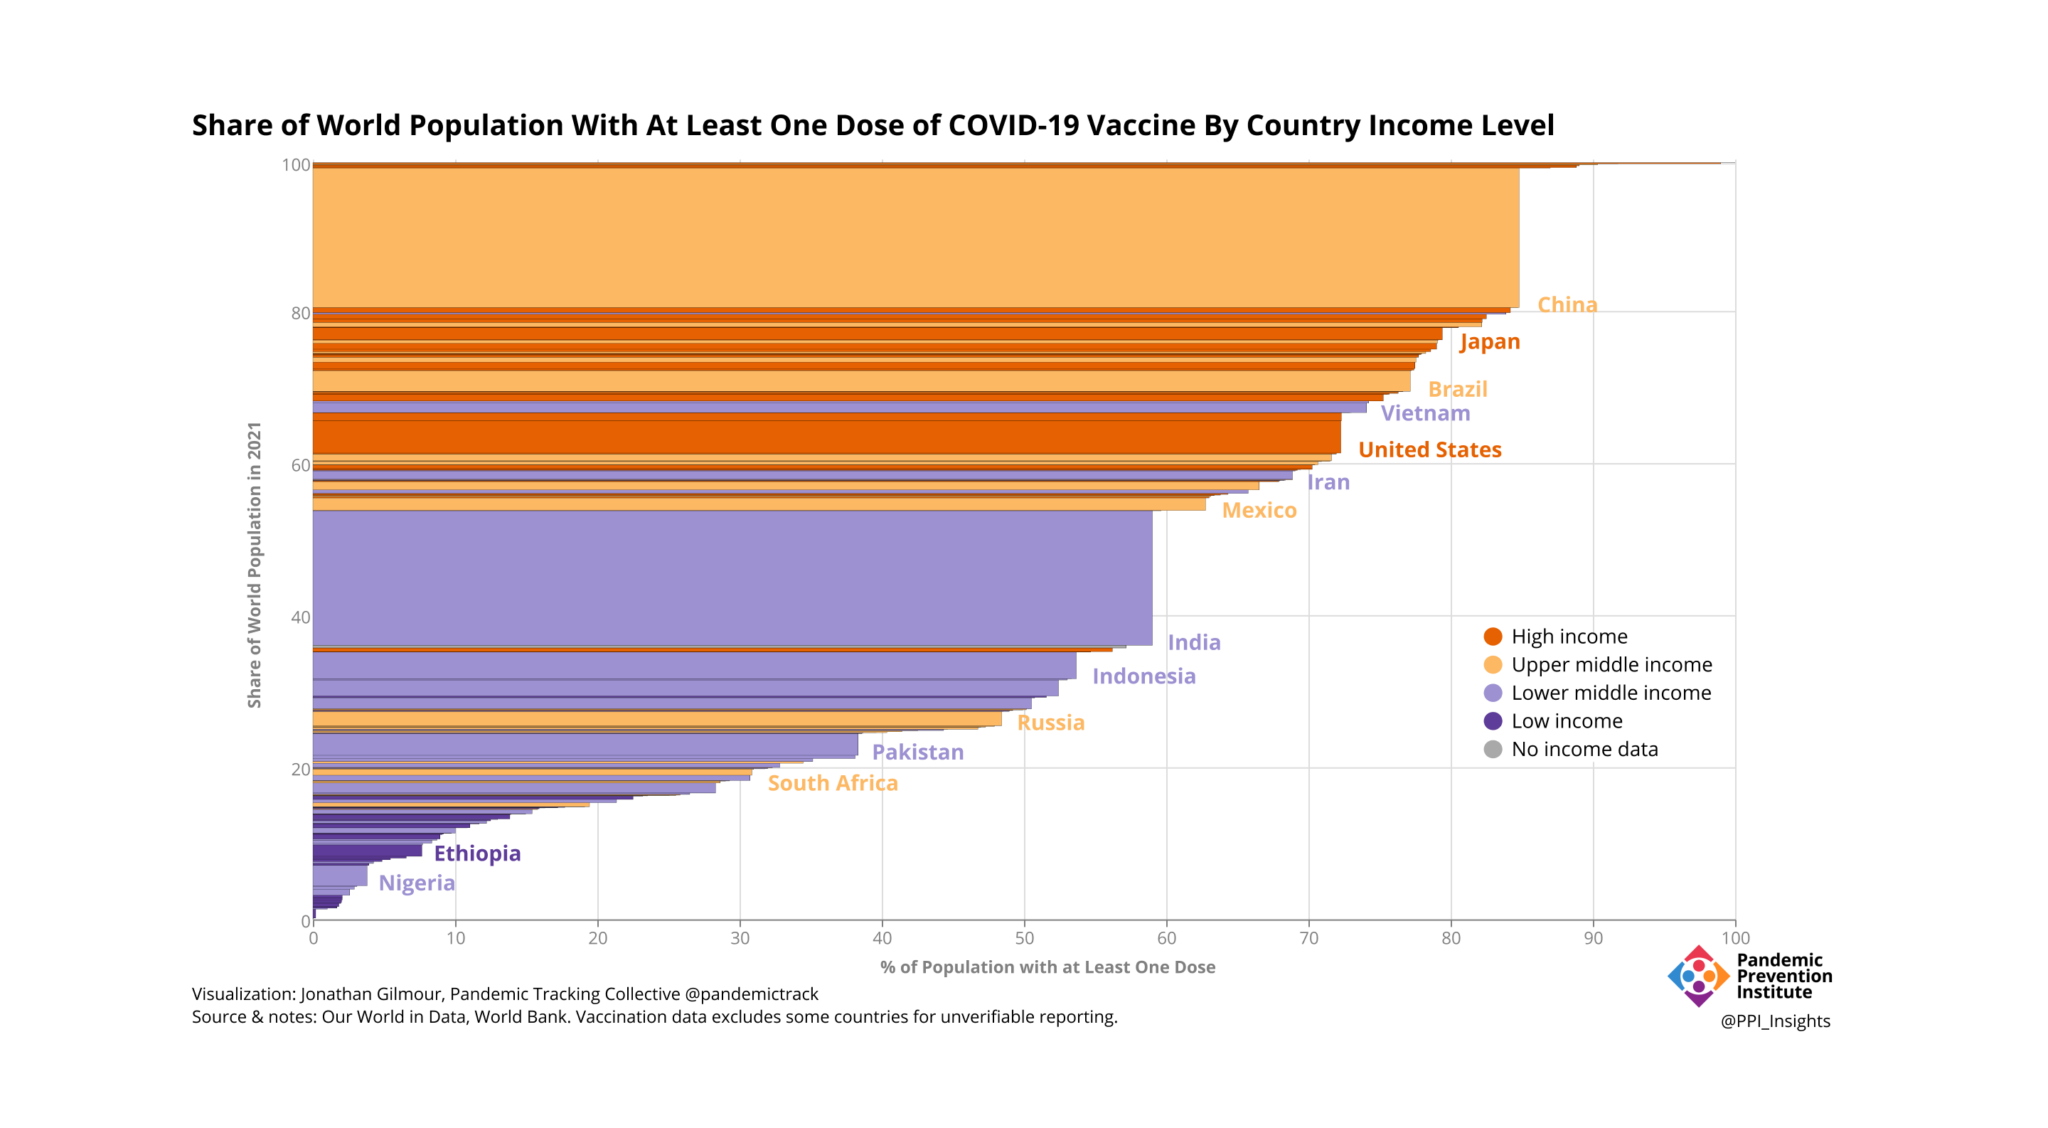 Bar chart showing share of world population with at least one dose of COVID-19 vaccine colored by country income level.